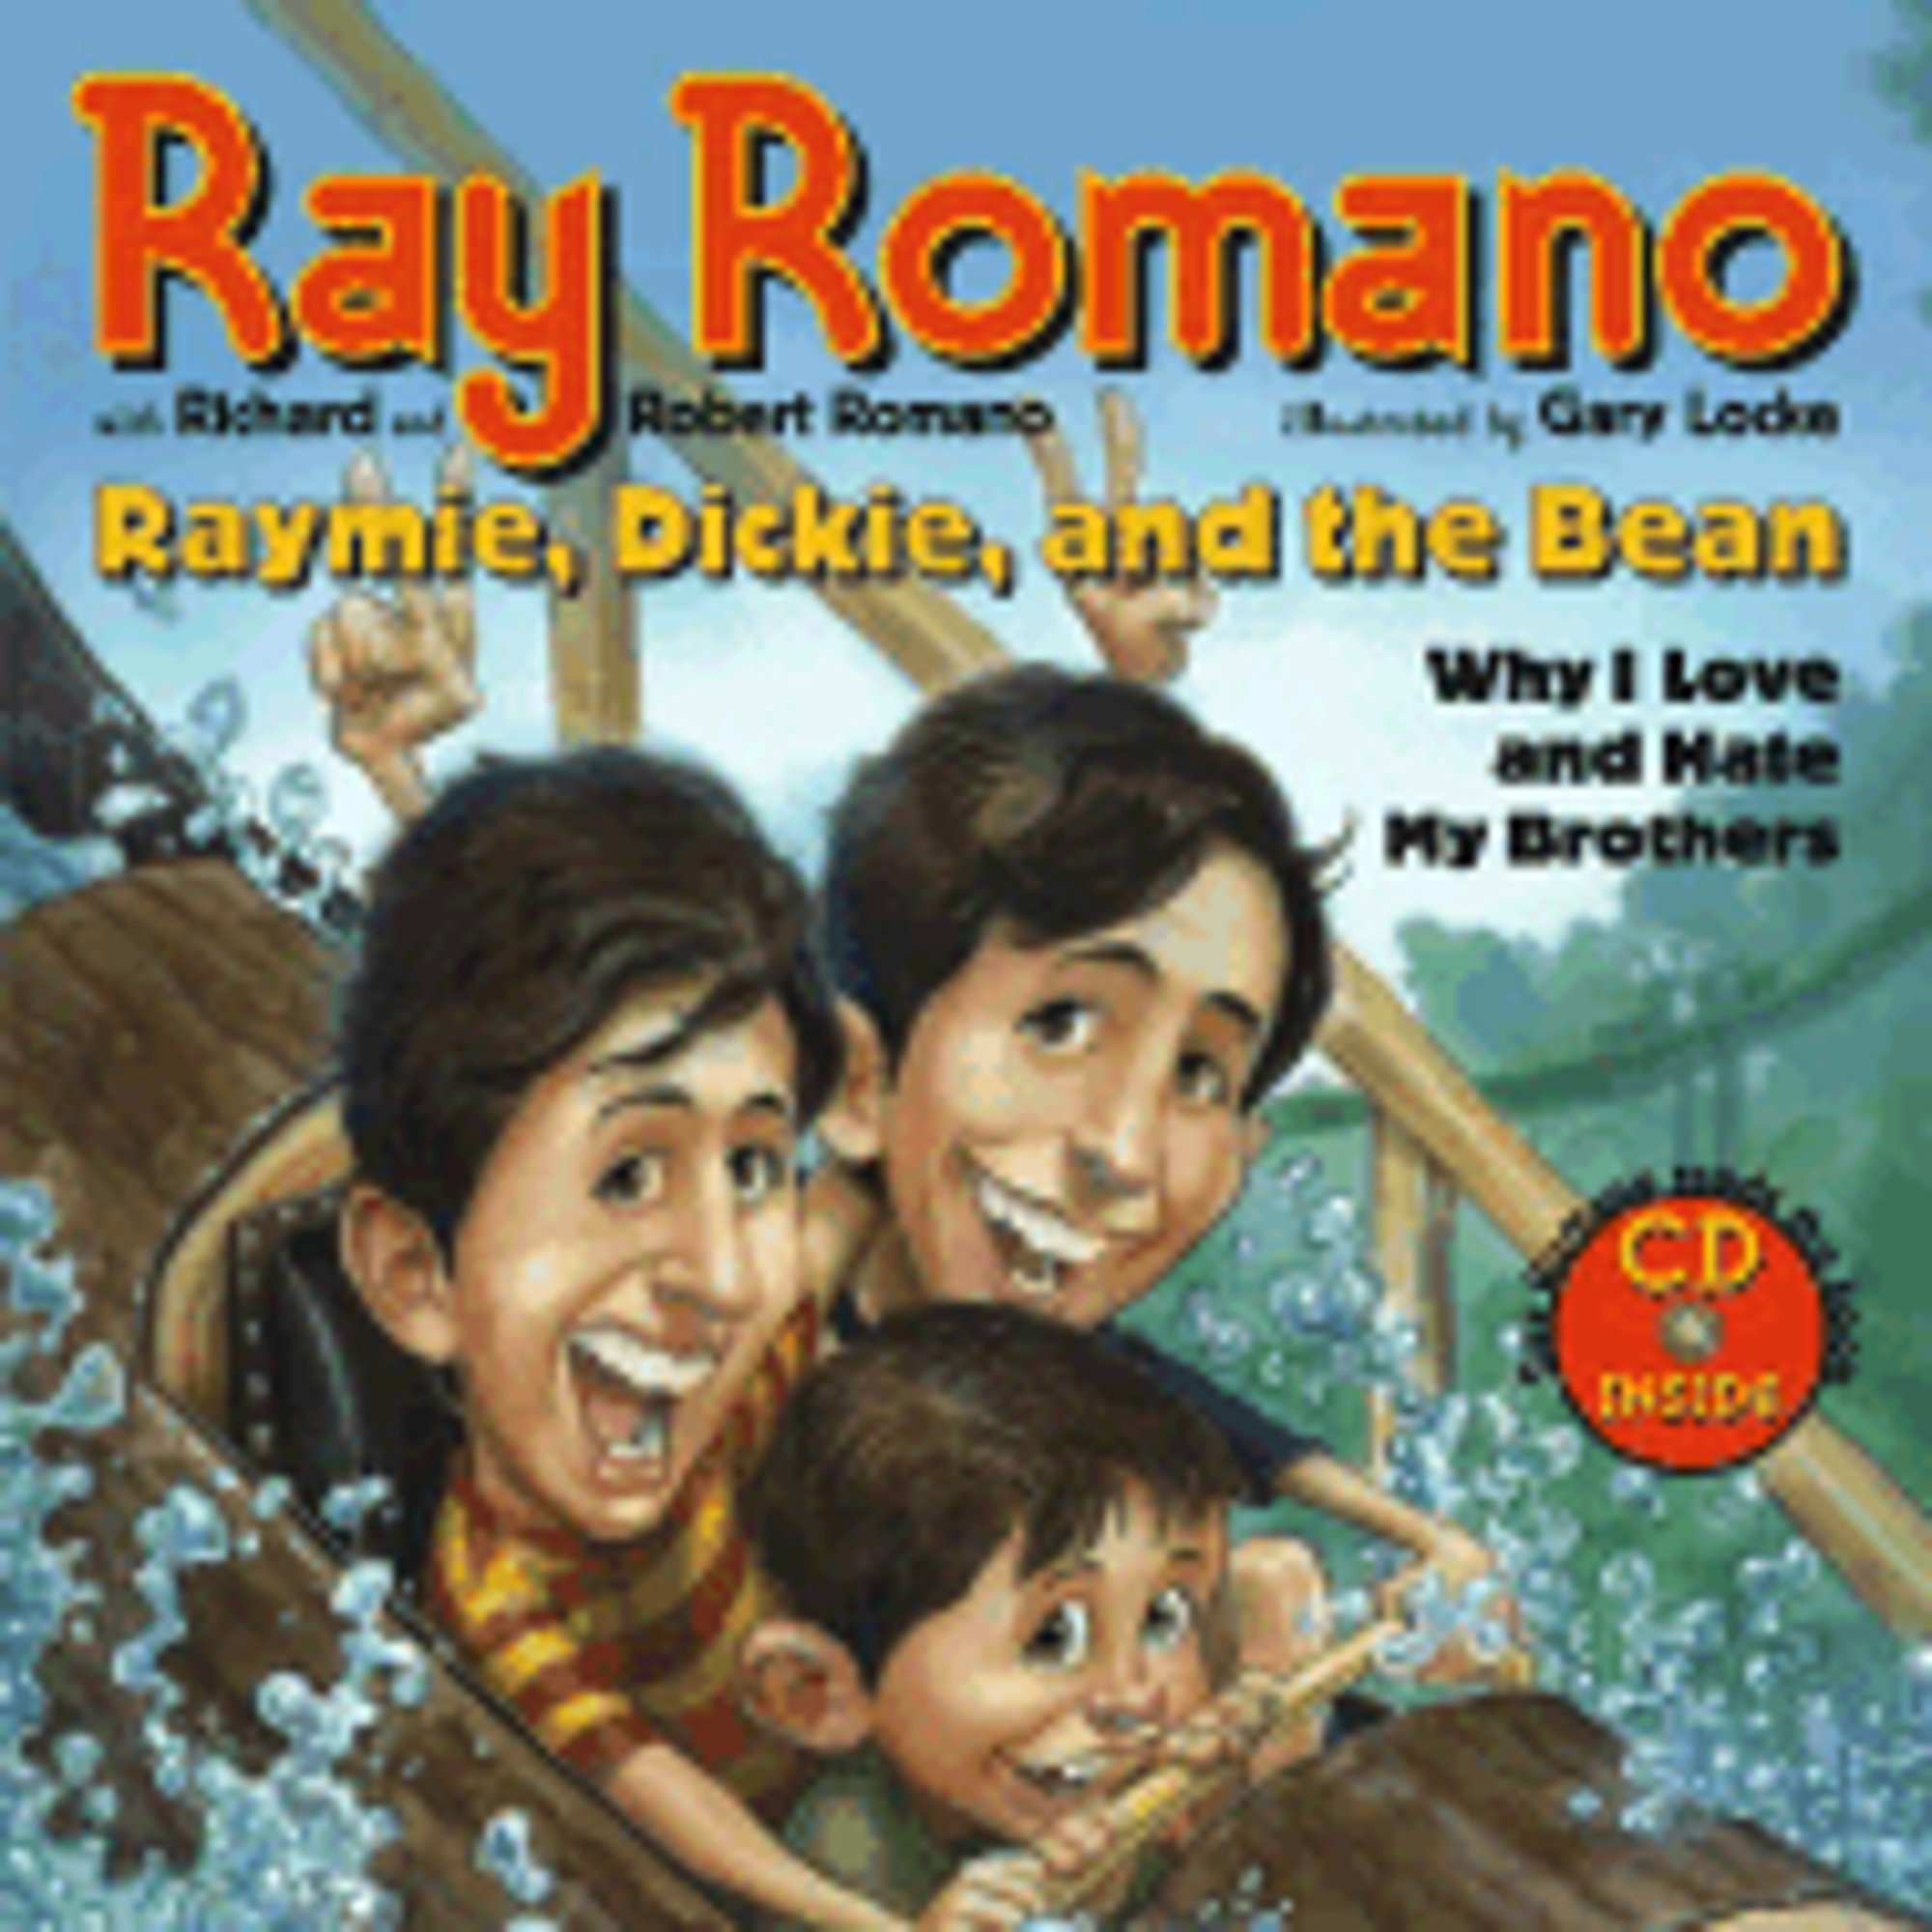 Raymie, Dickie, and the Bean : Why I Love and Hate My Brothers (Book and CD) - image 1 of 1